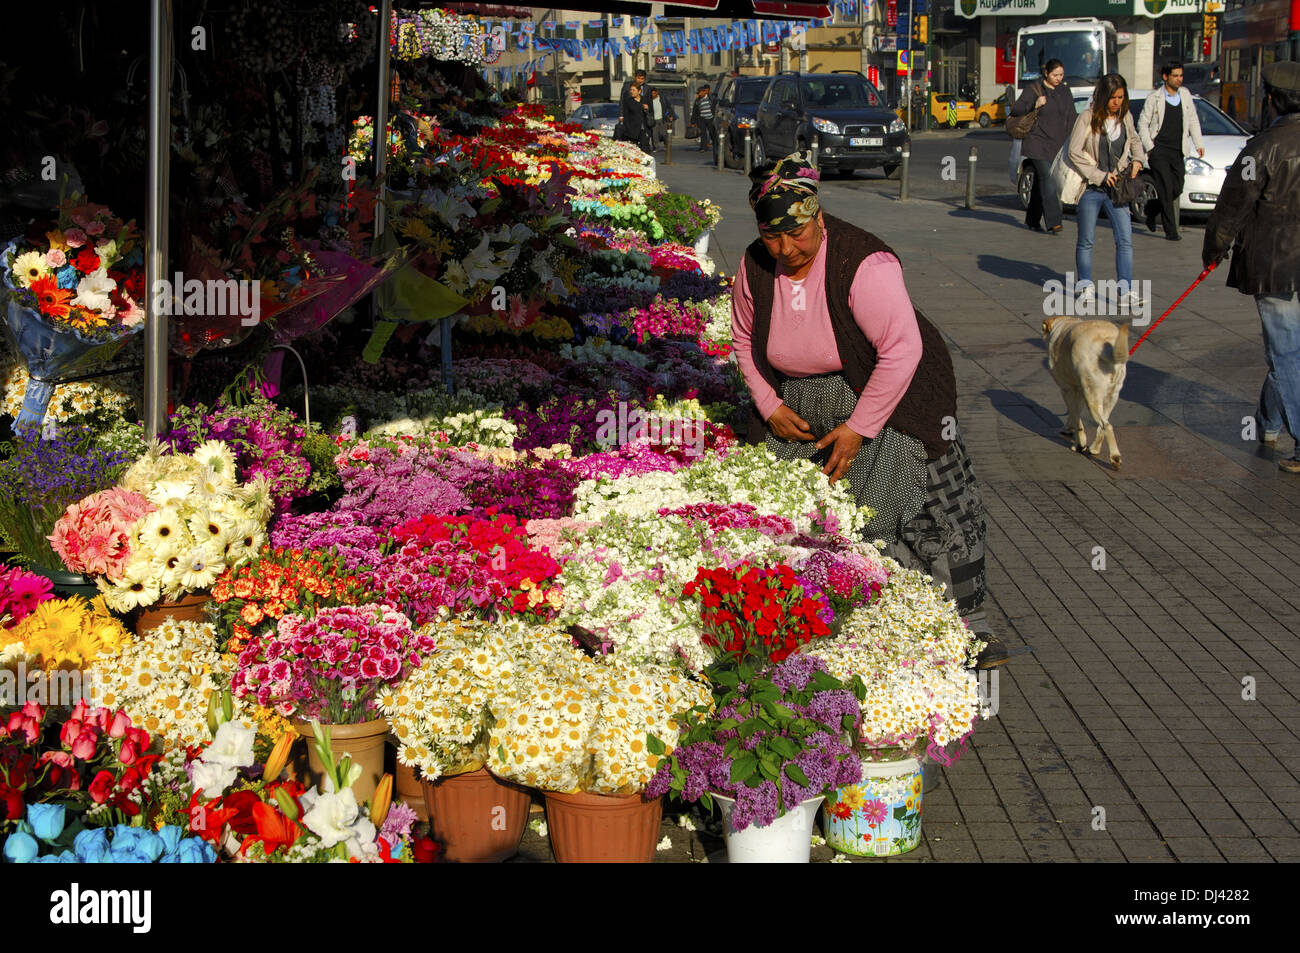 Flower stall atTaksim Square, Istanbul,Turquie Banque D'Images